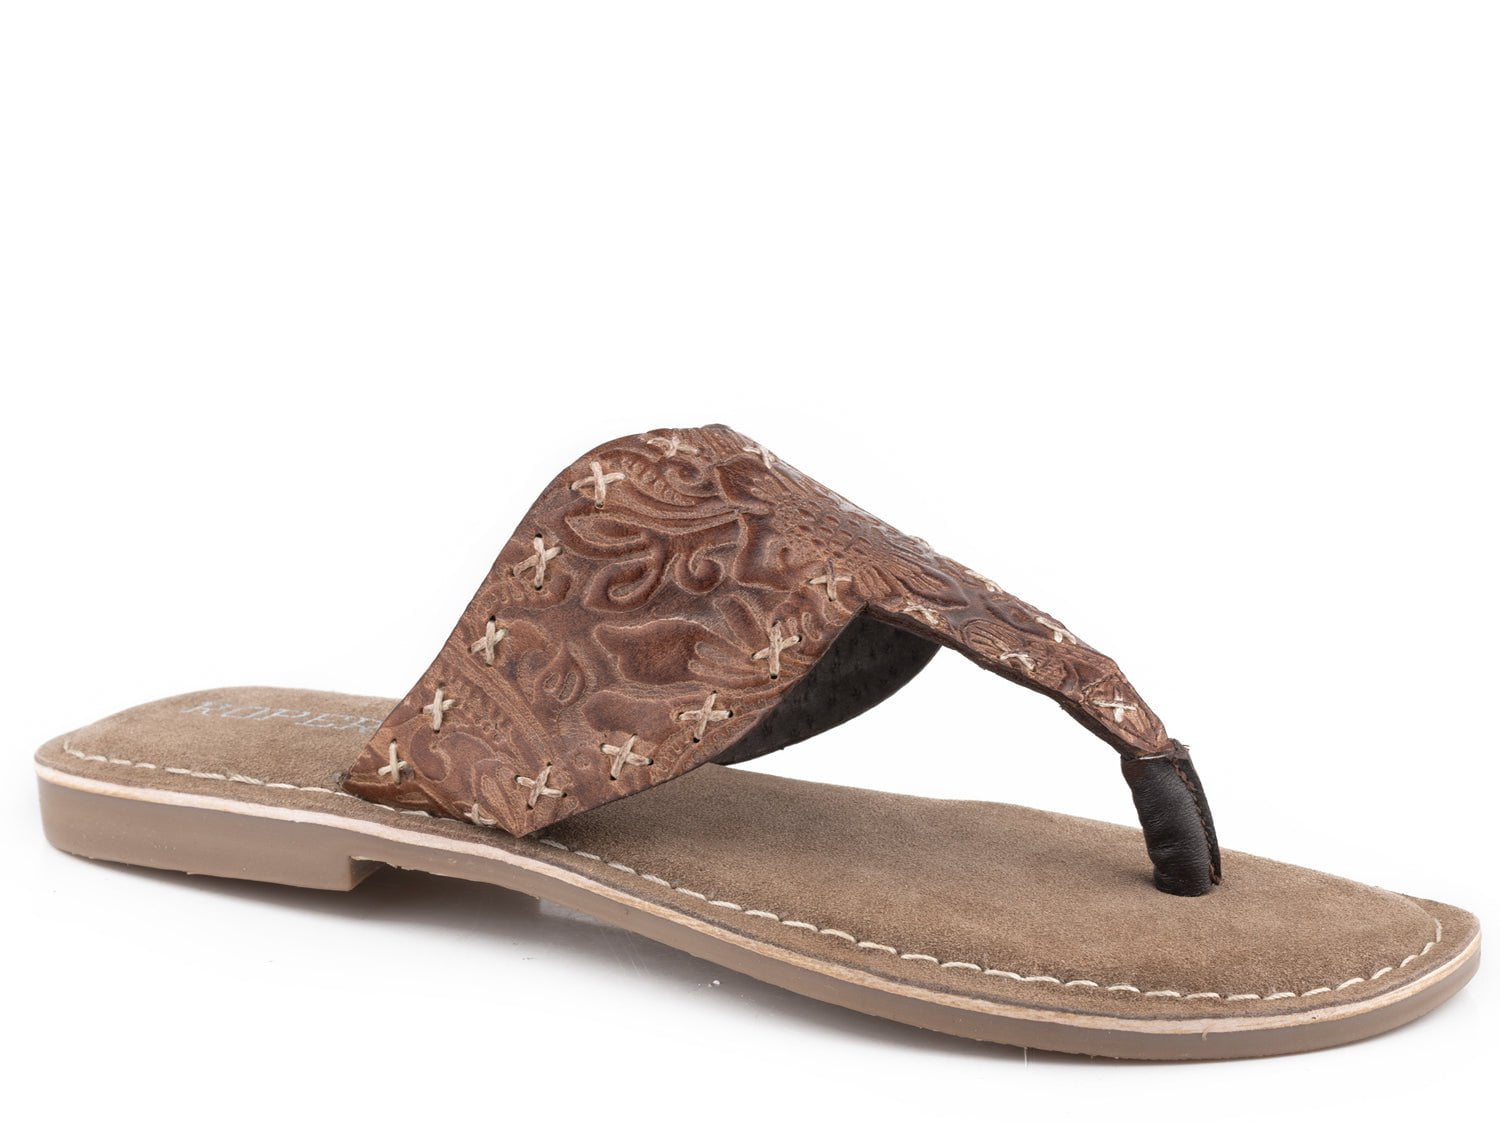 Roper Womens Juliet Brown Leather T-Strap Sandals – The Western Company